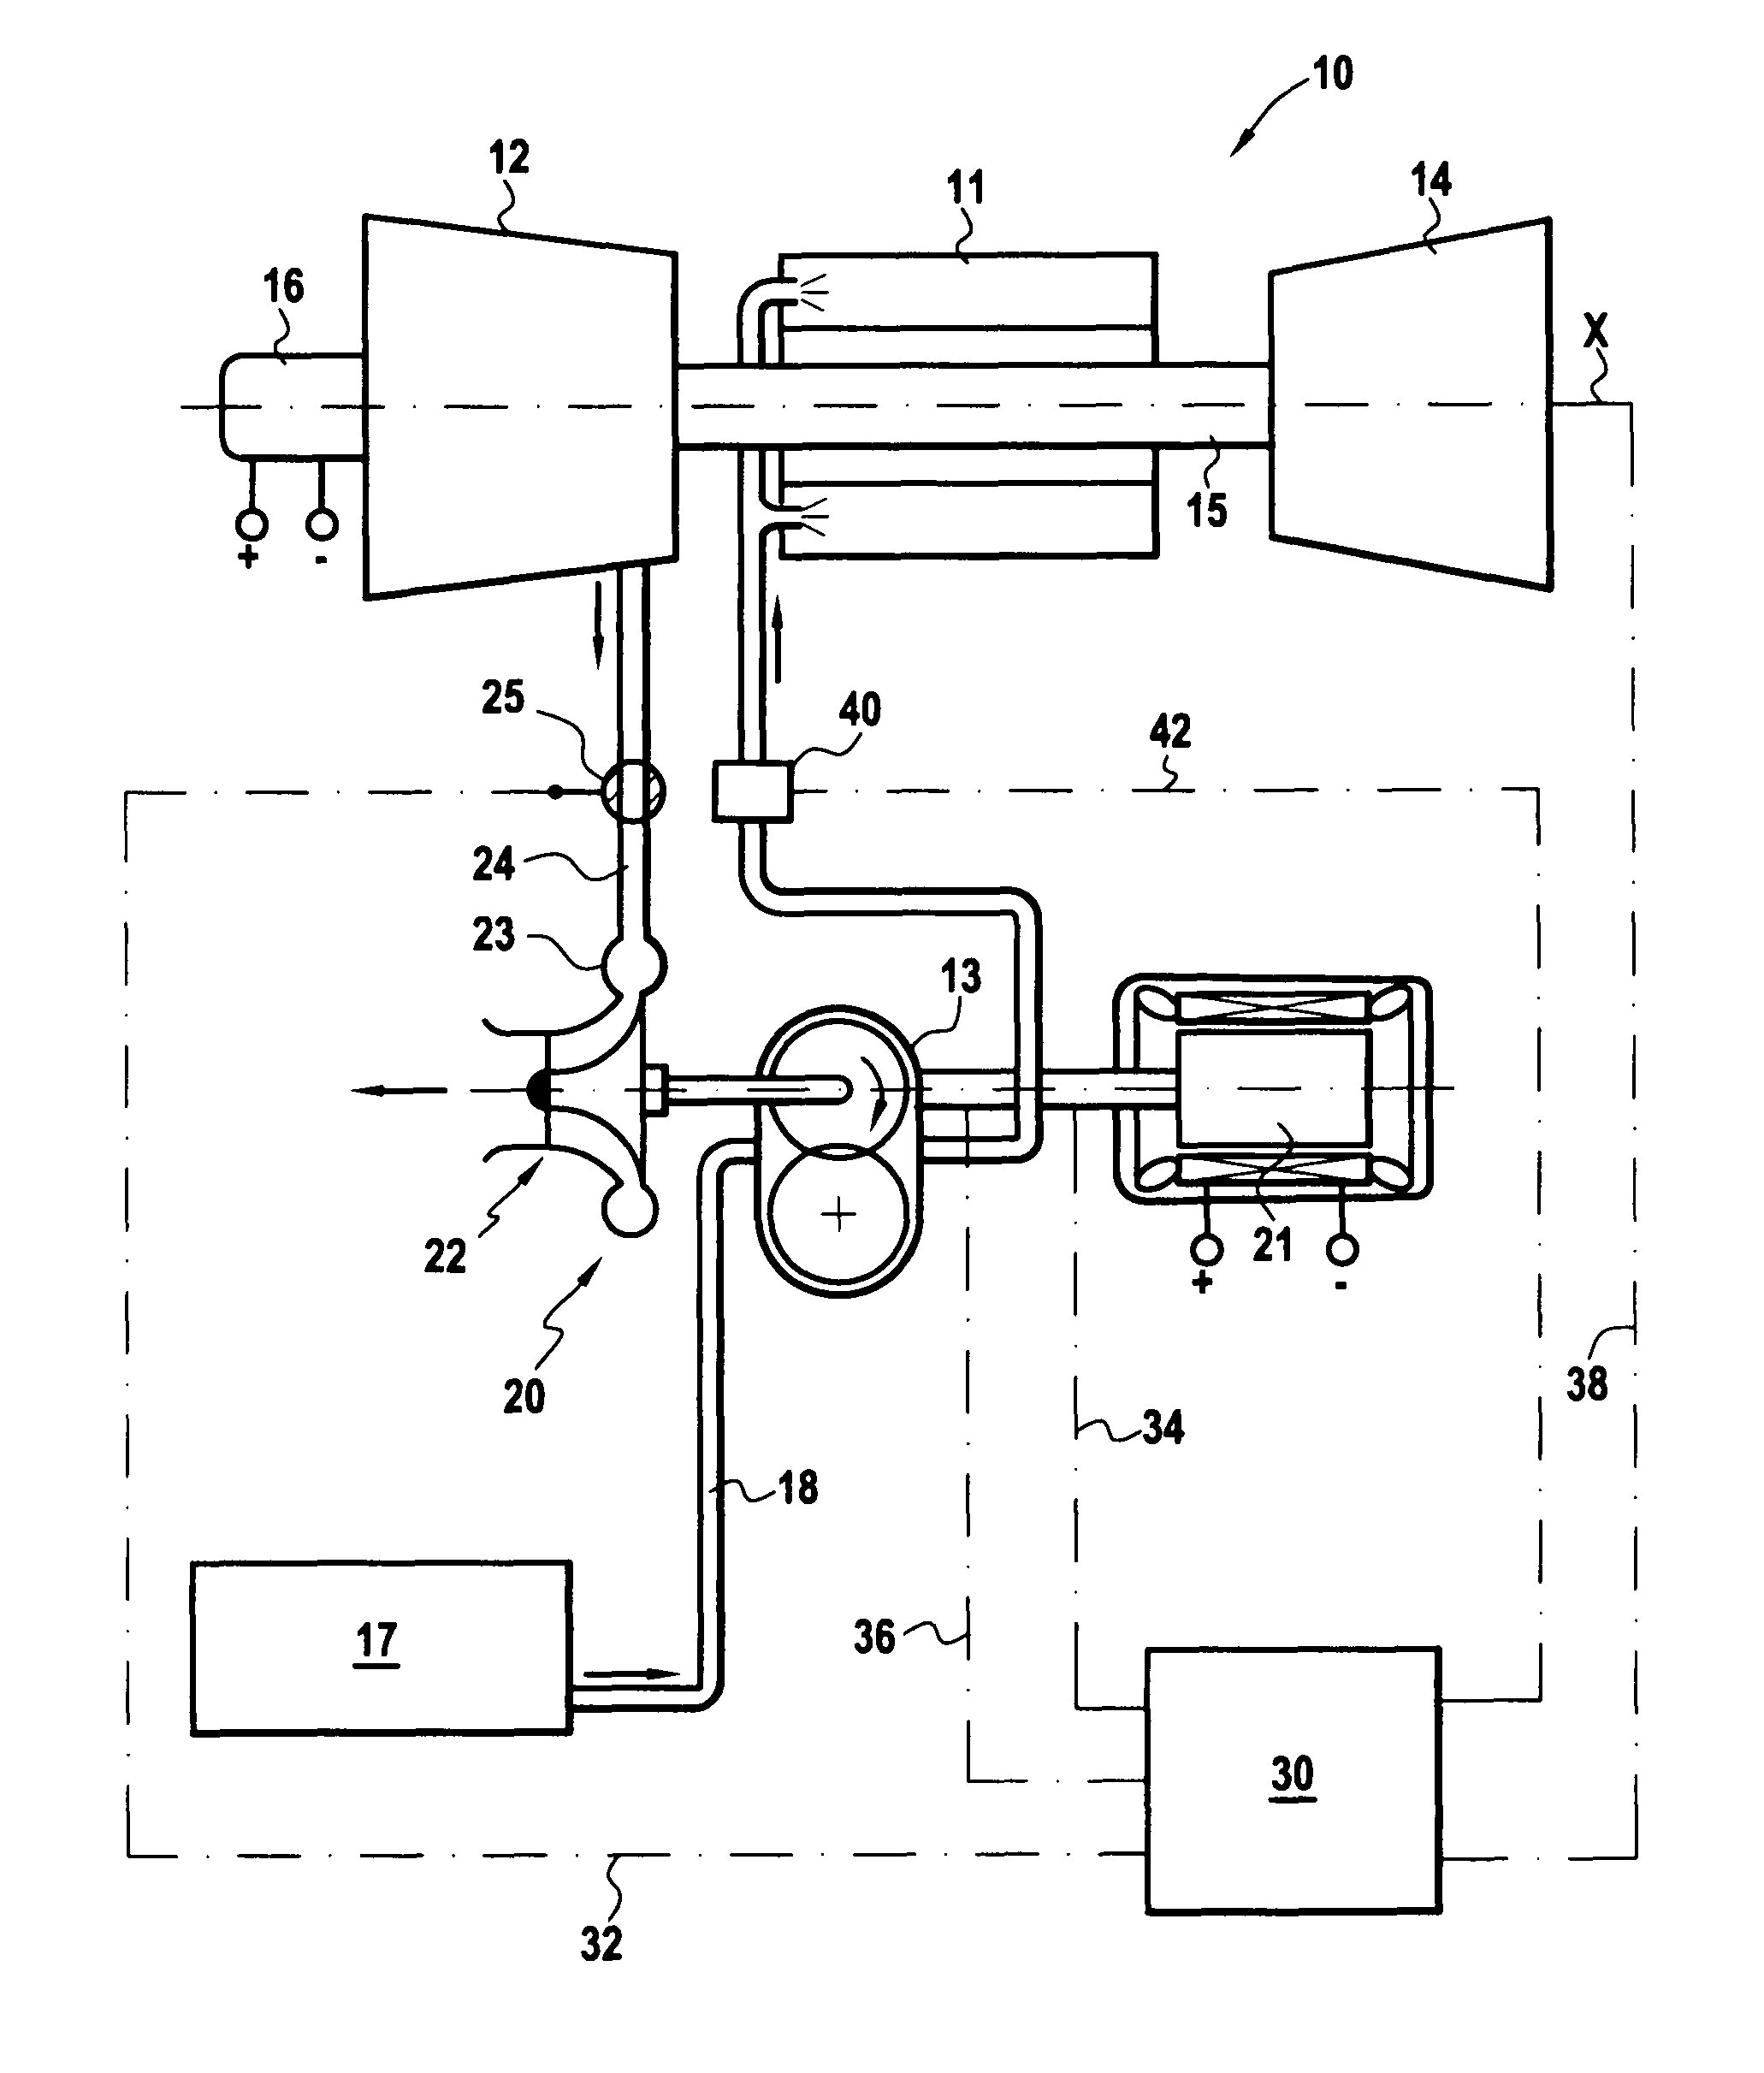 Assistance and emergency backup for the electrical drive of a fuel pump in a turbine engine